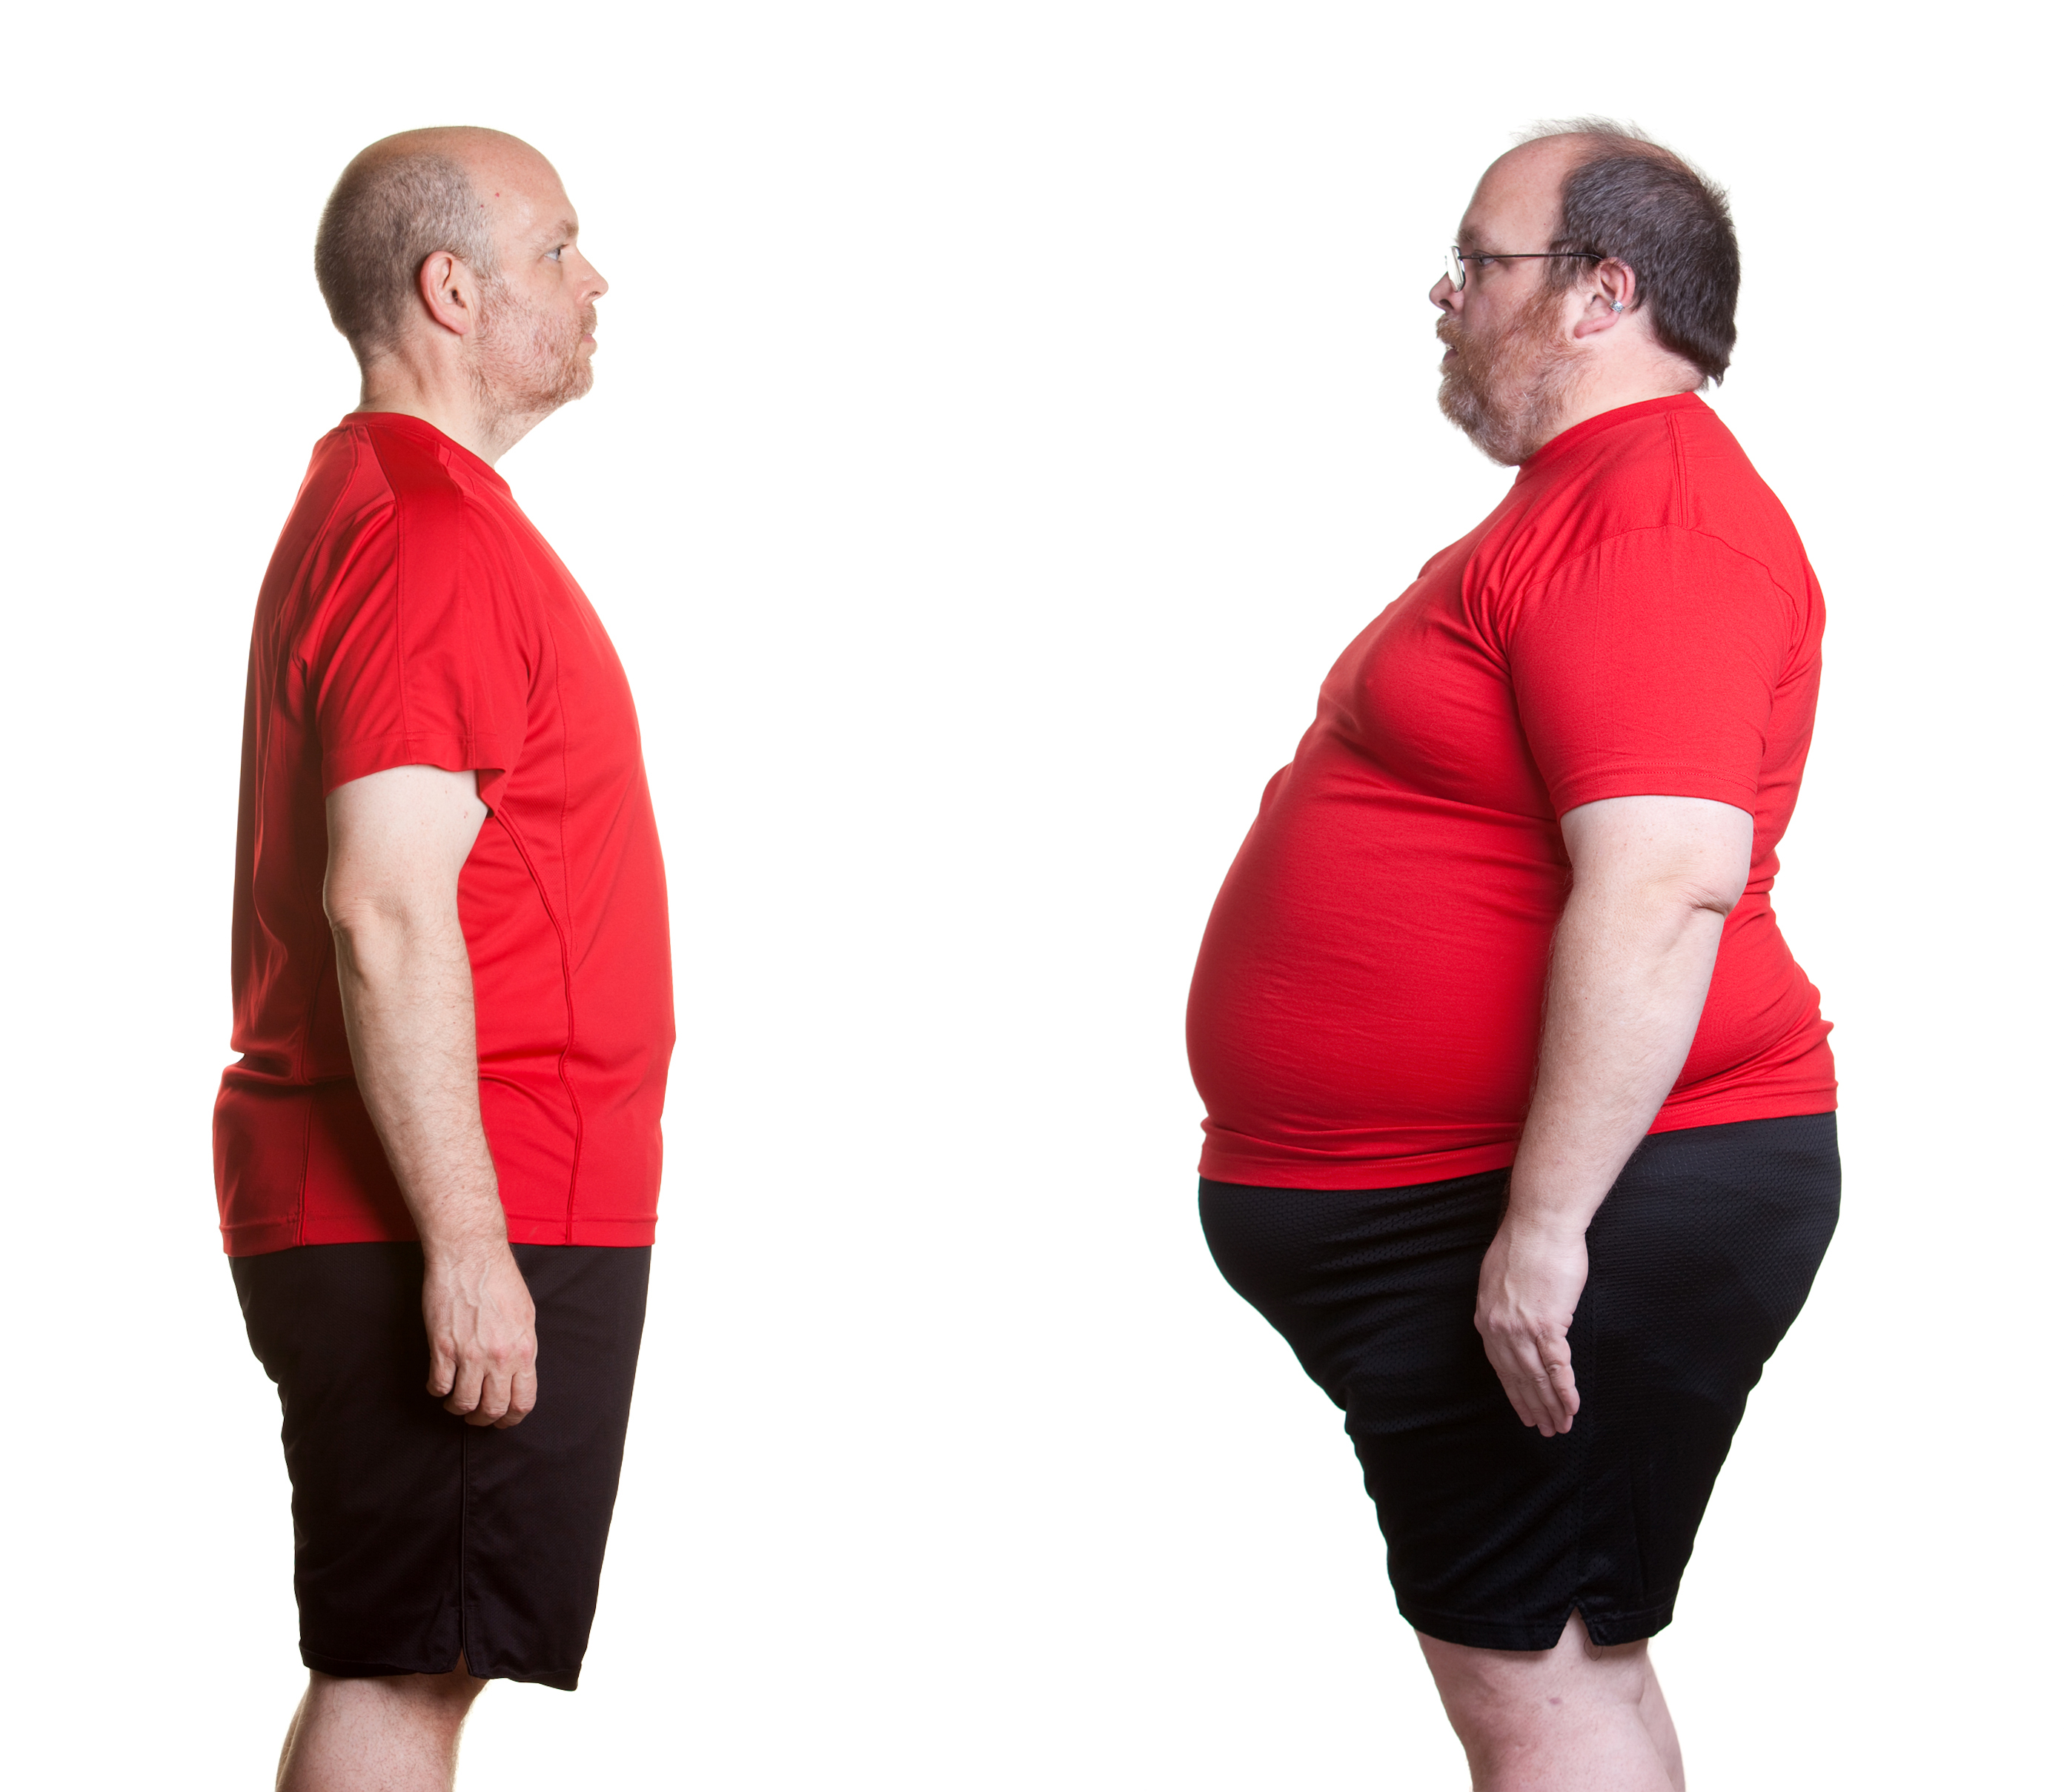 Weight loss & the fat gene